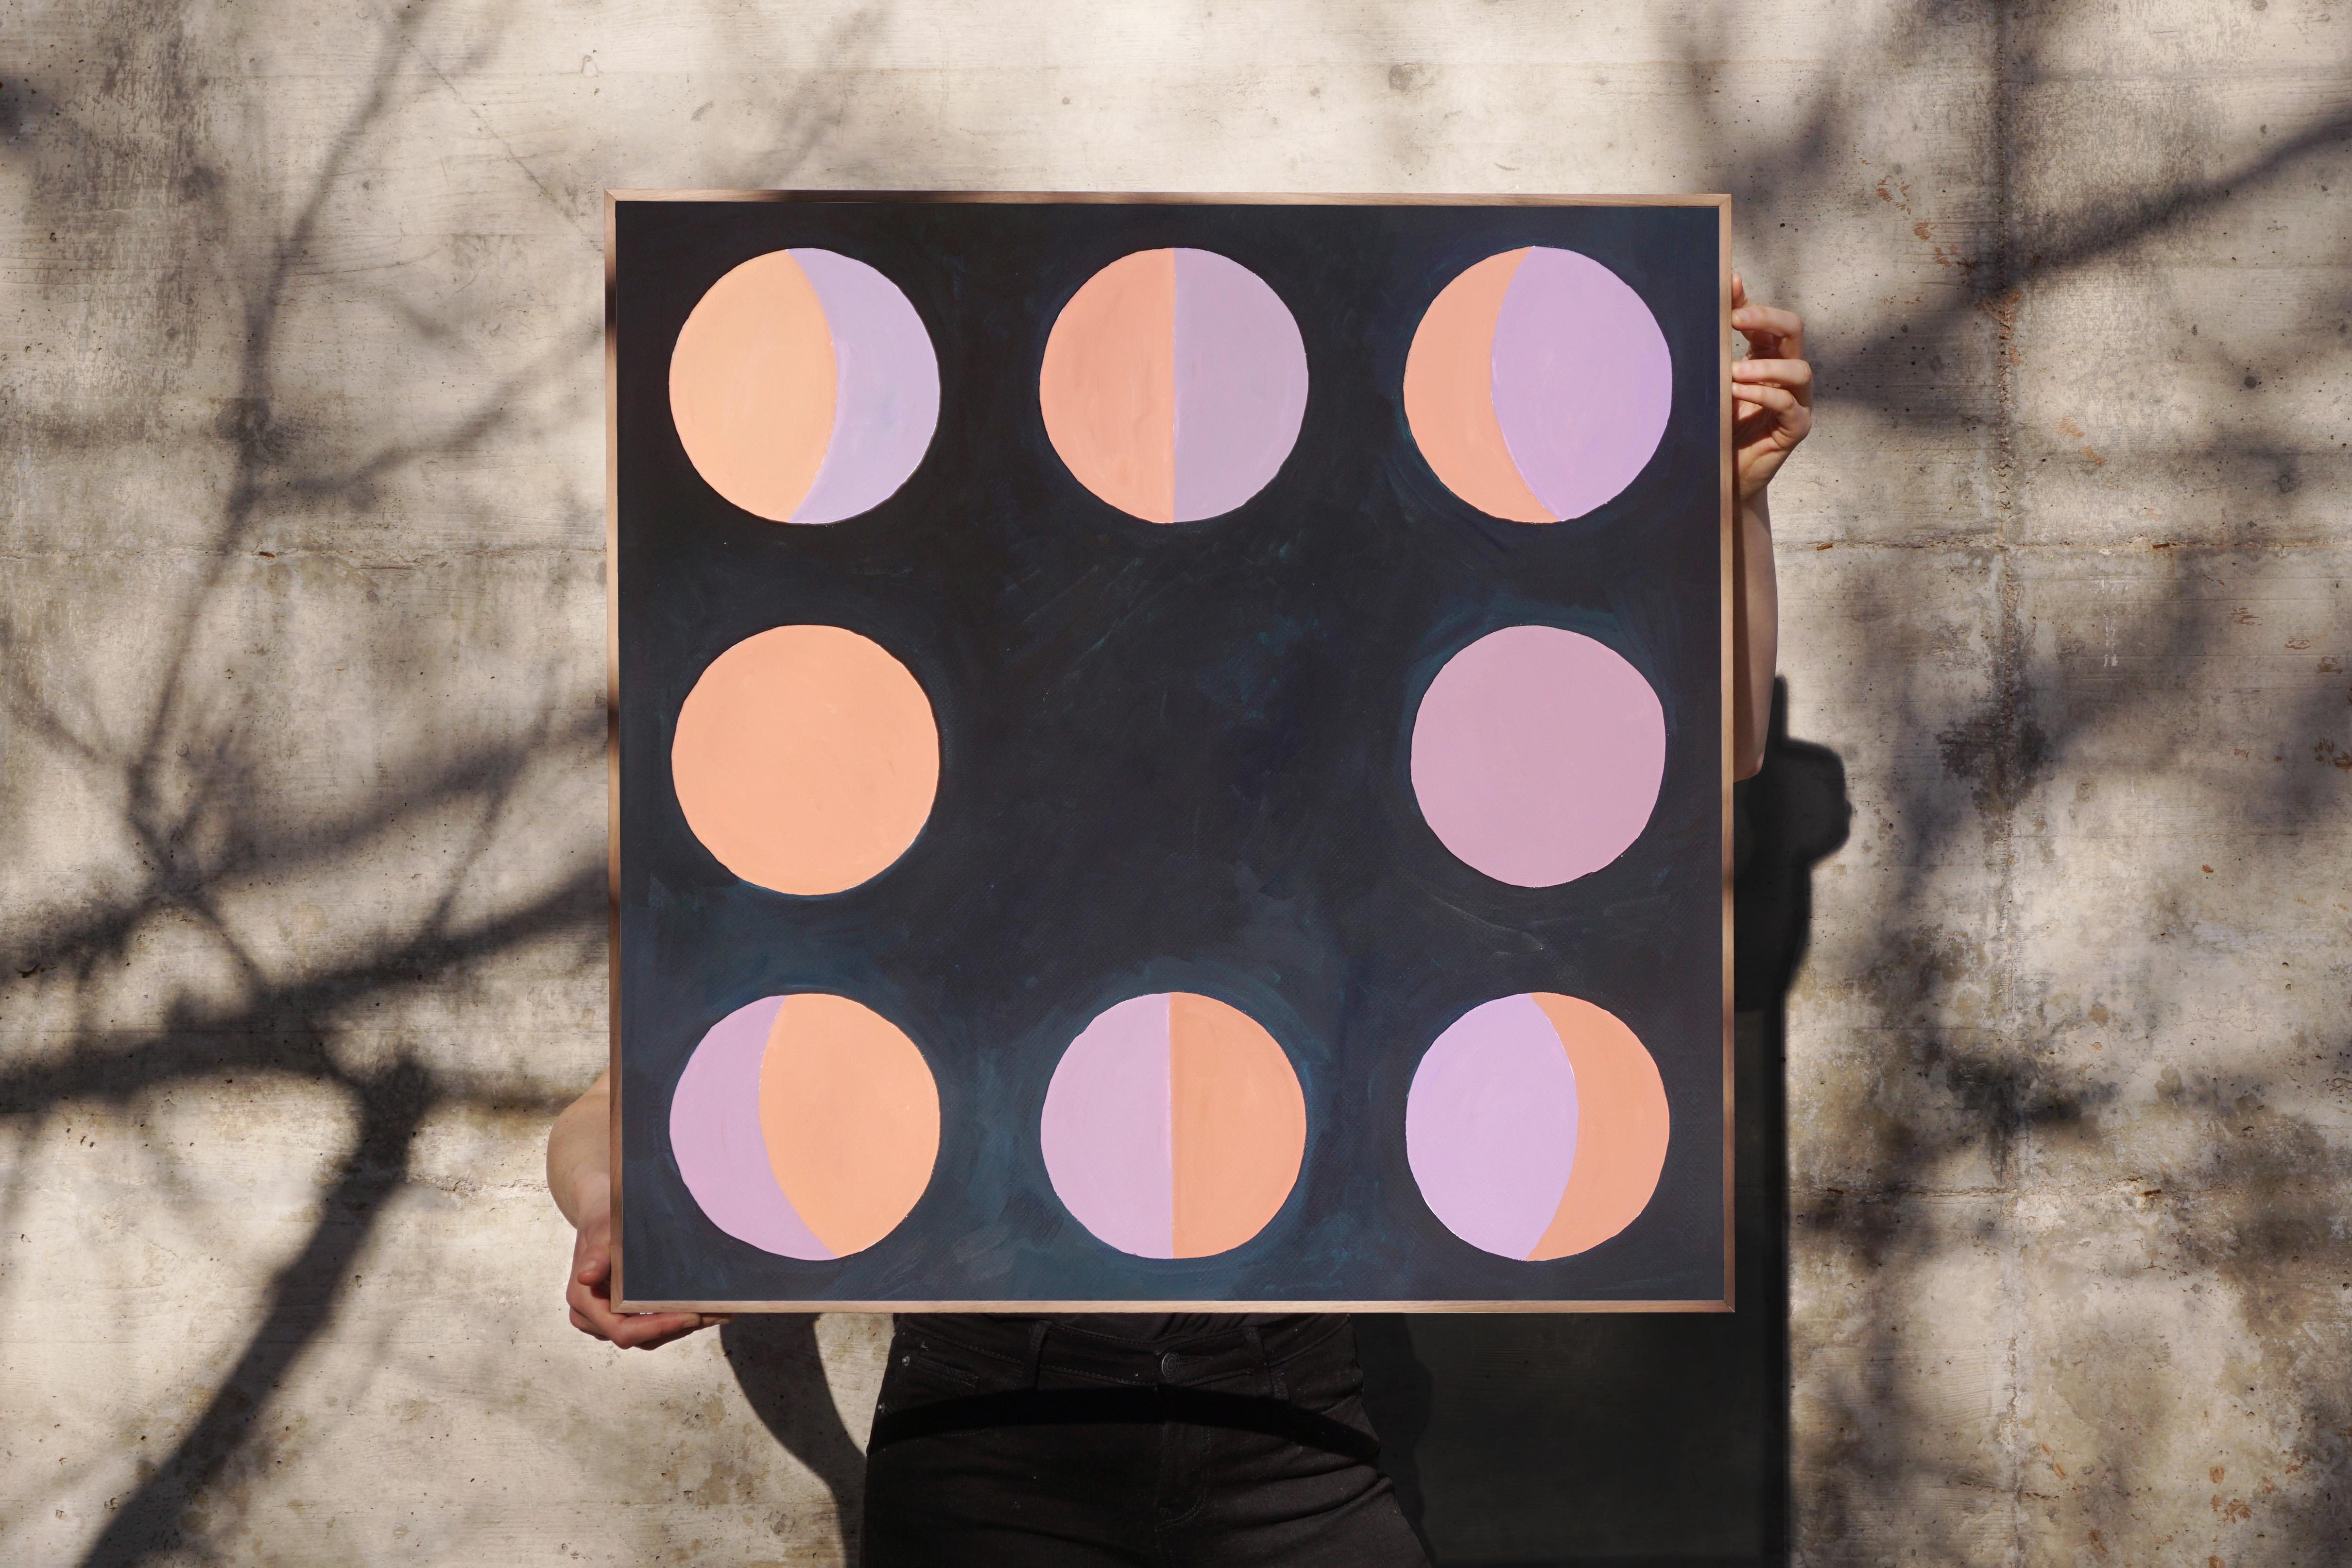 Moon Phase Scheme on Black, Mauve and Coral Circles, Primary Geometry Astronomy  - Painting by Natalia Roman